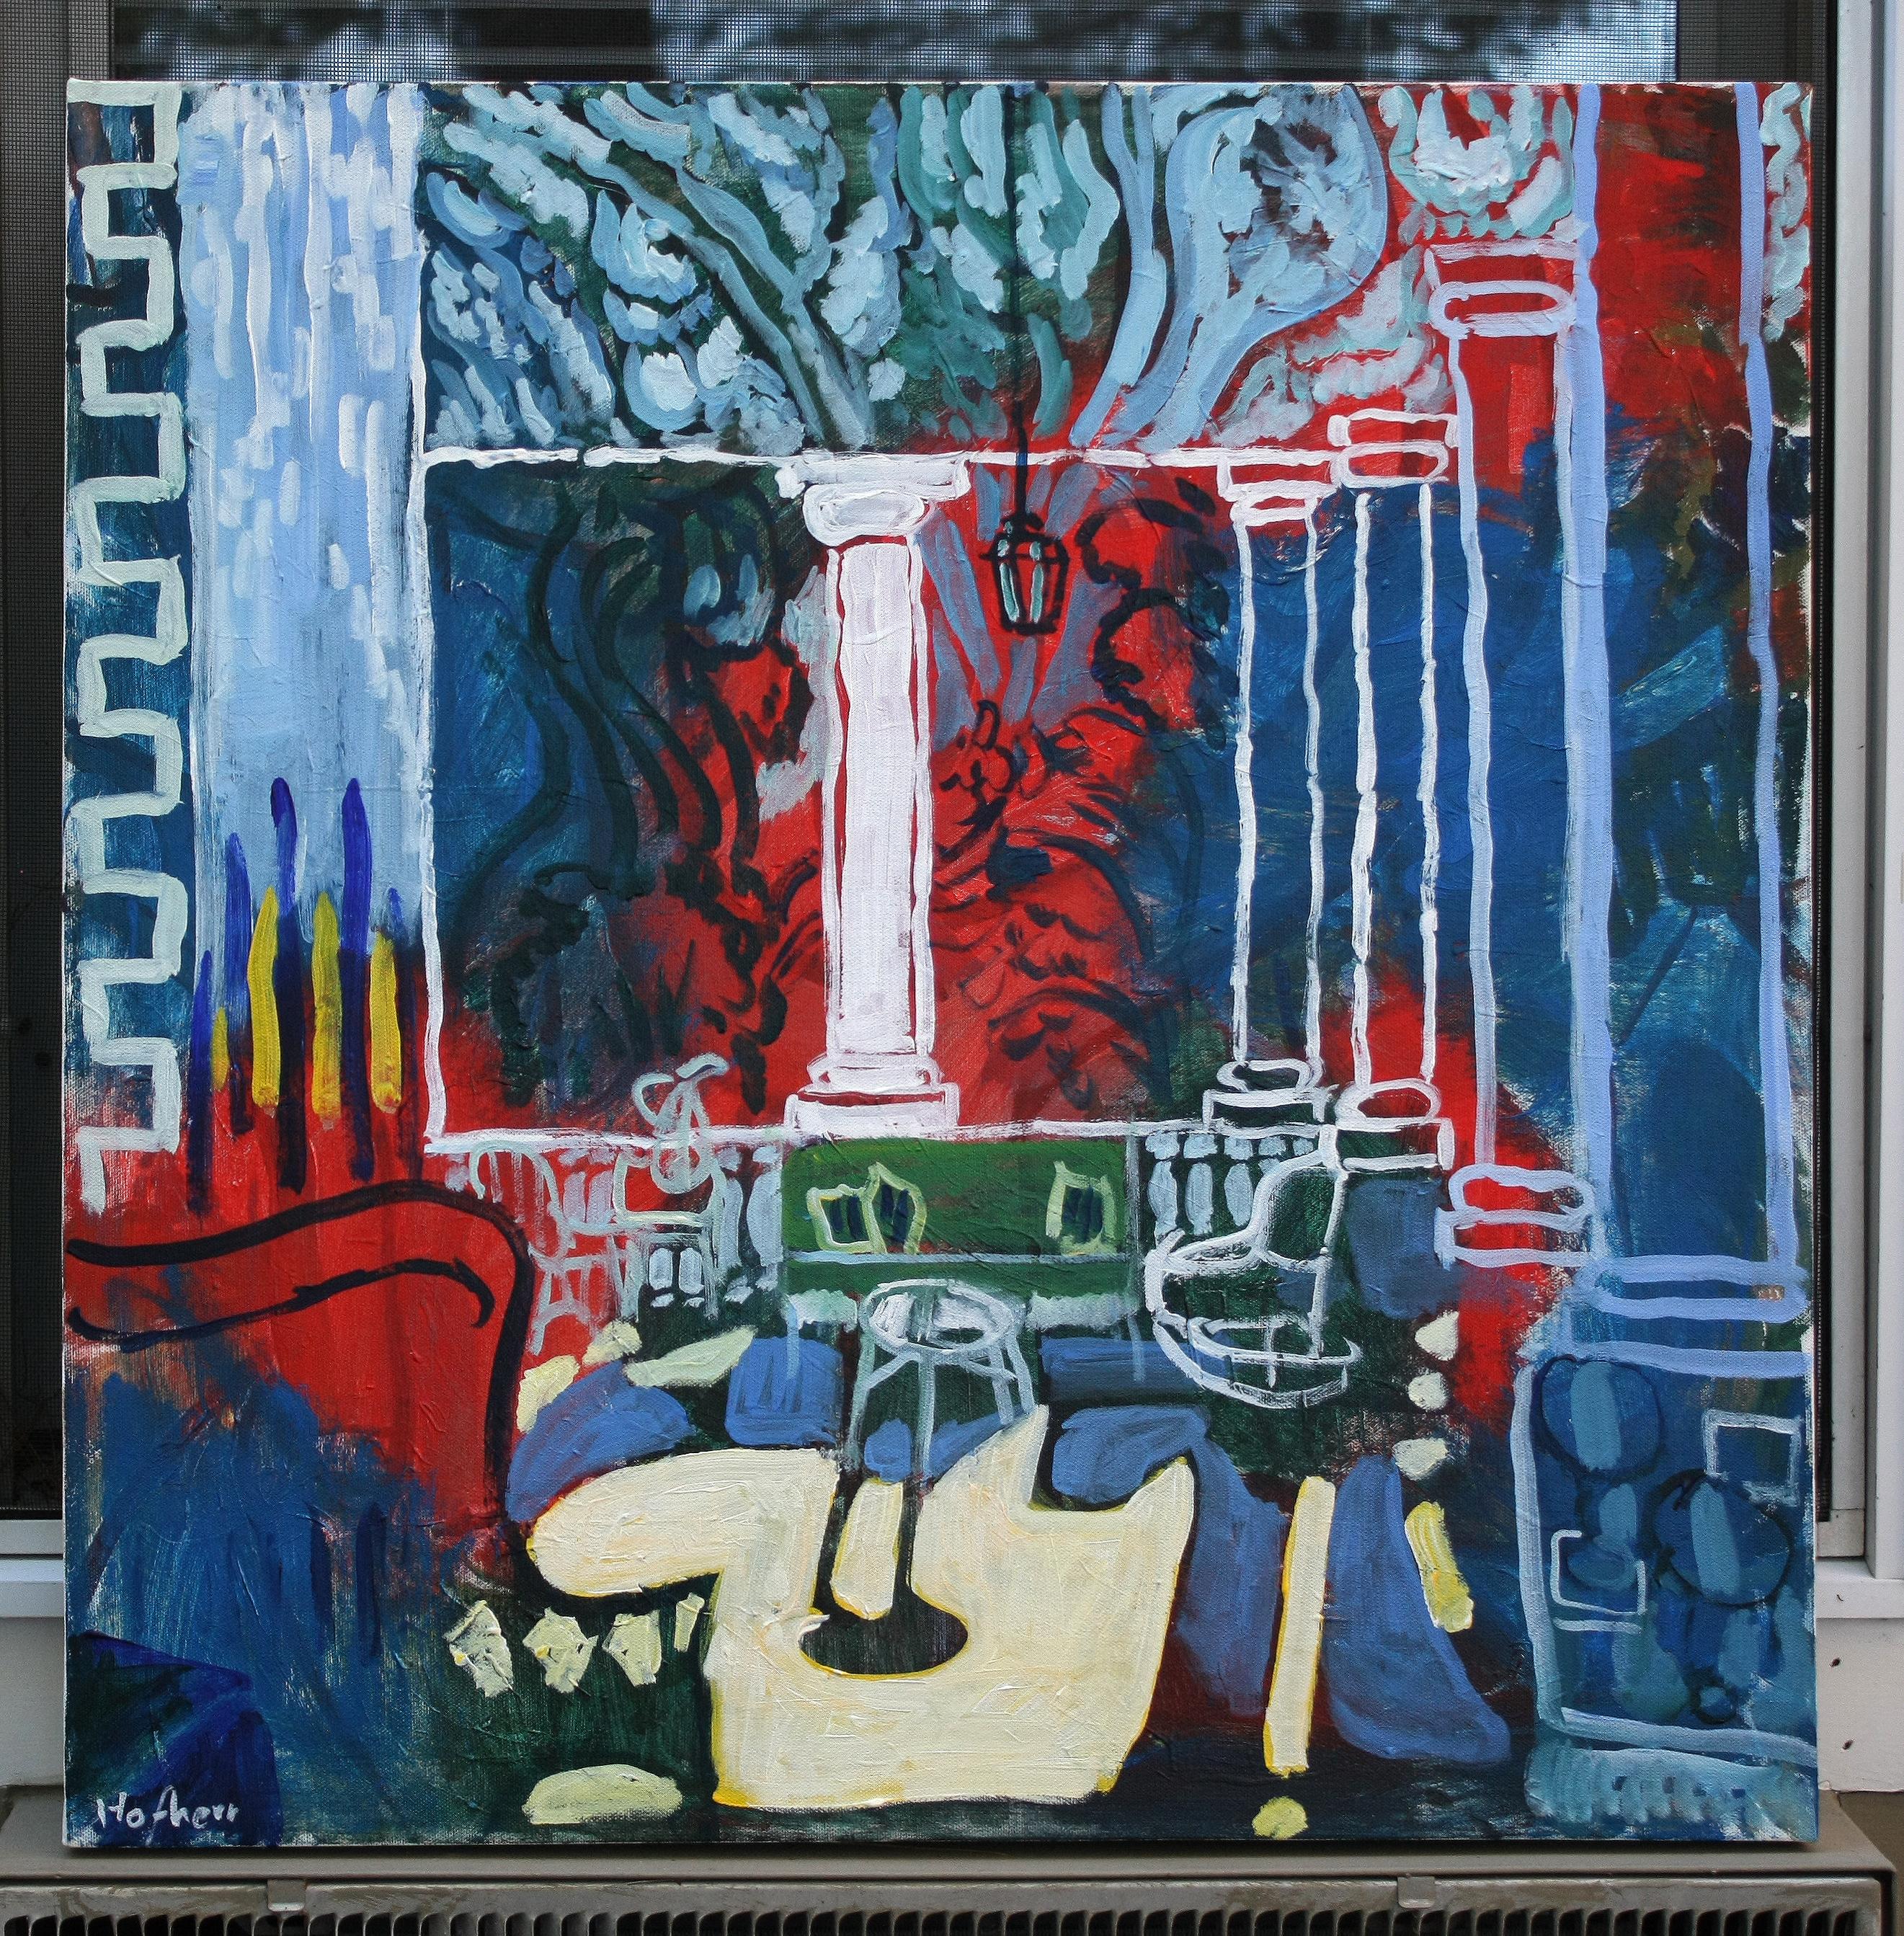 <p>Artist Comments<br>Bold colors and minimal representations render an elegant, sunlit porch. The red and blue underpainting, coupled with the simplified treatment of the objects, infuses the piece with vibrant and imaginative energy. With a